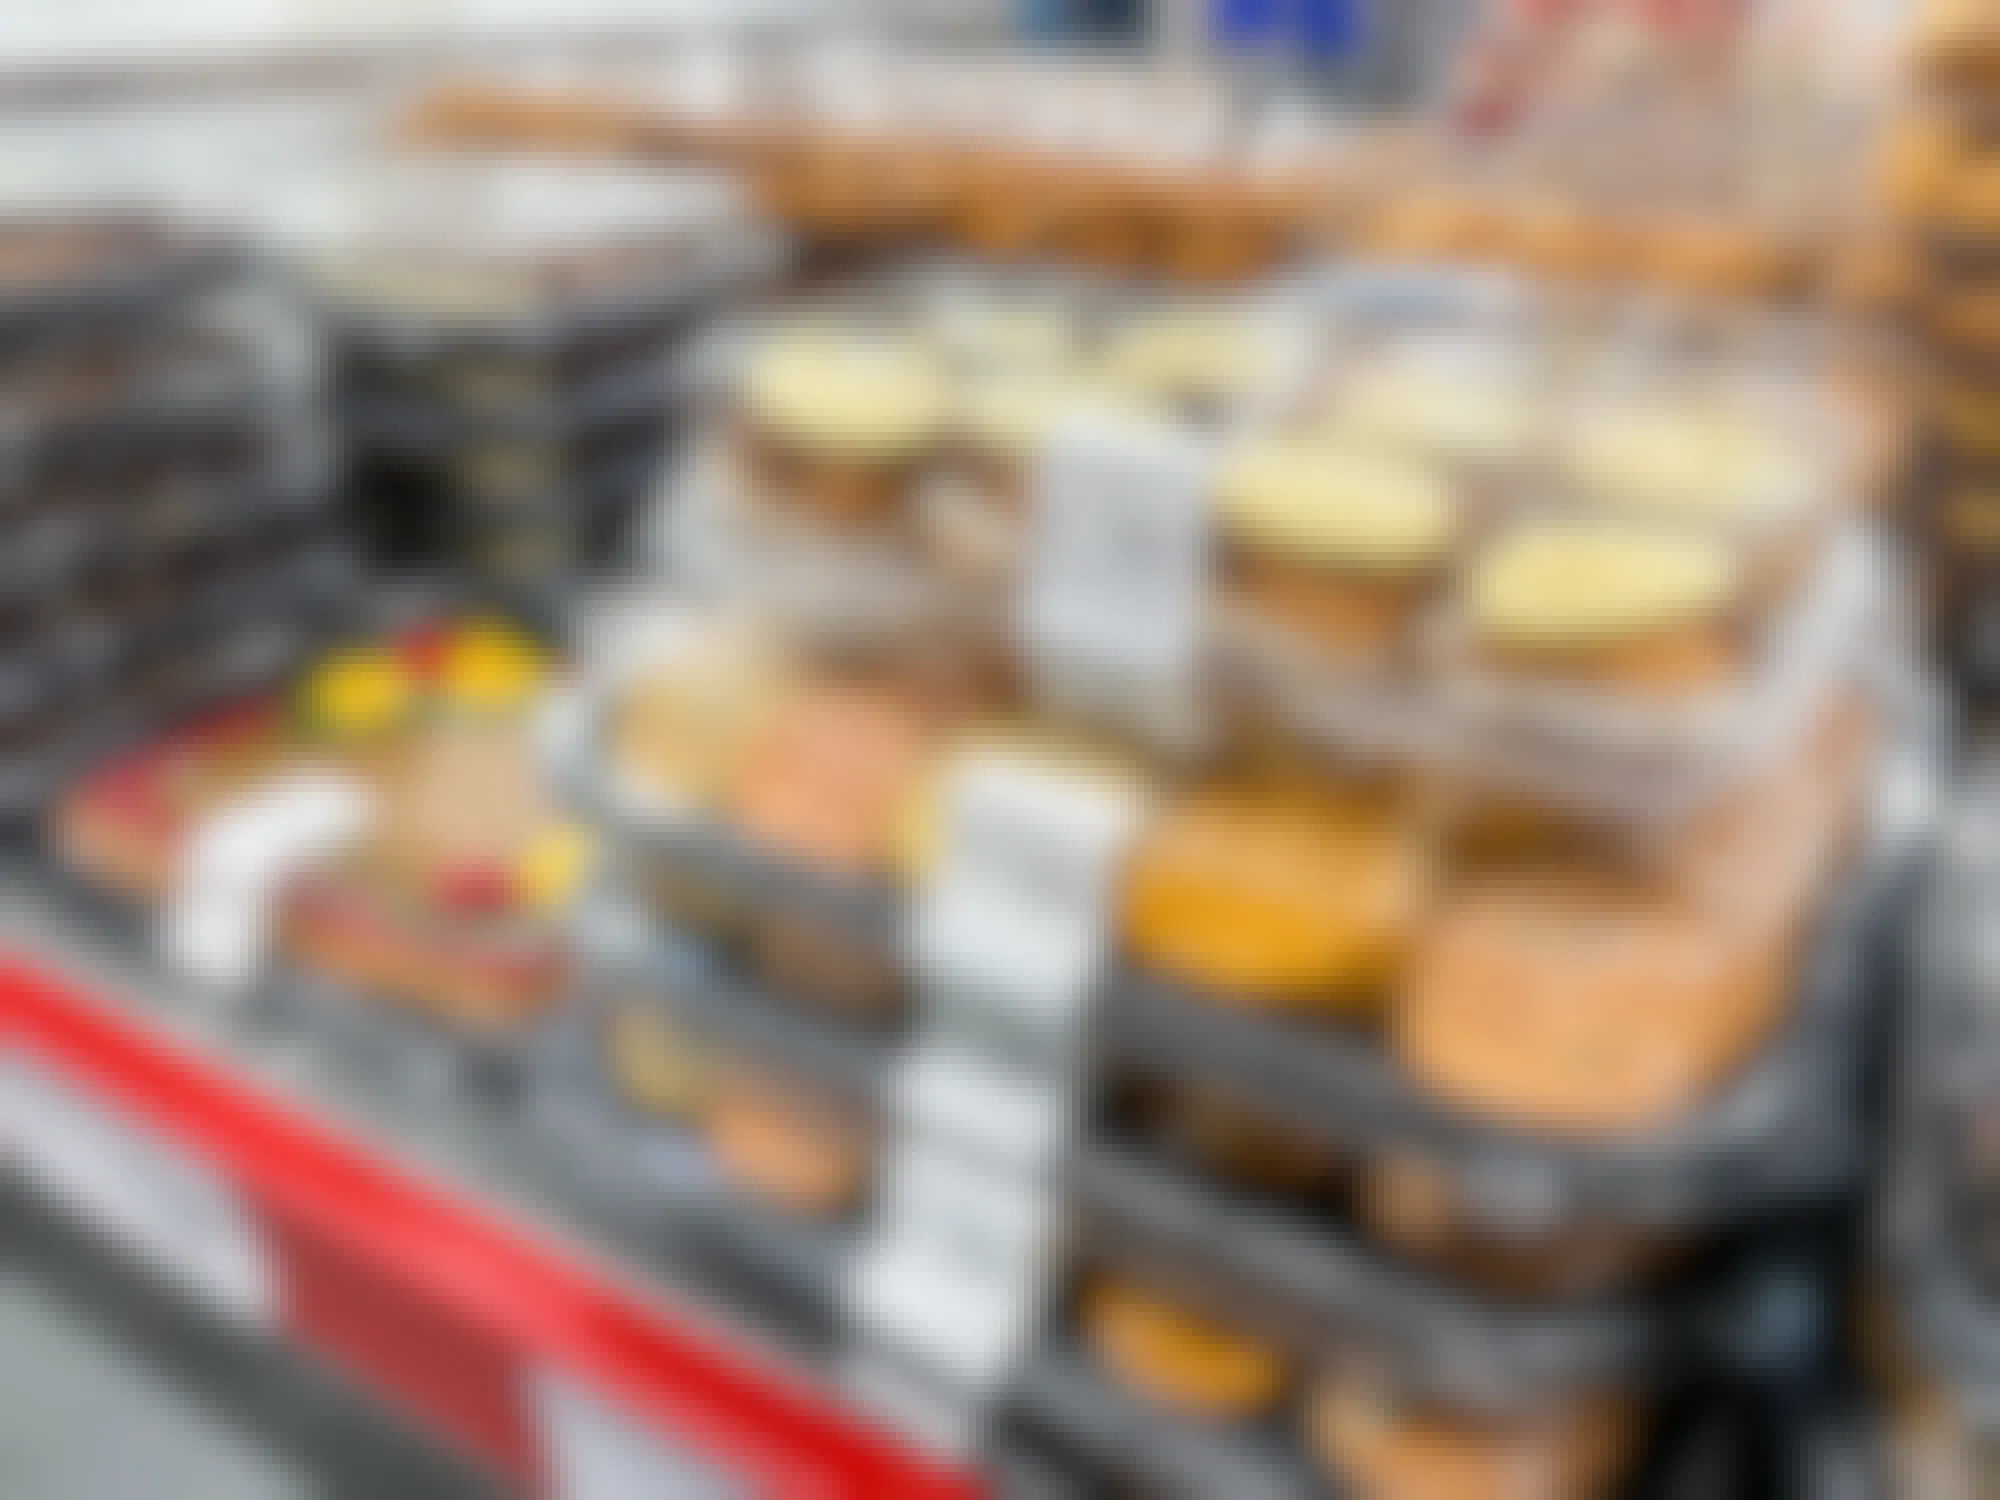 Baked goods in the bakery at Sam's Club